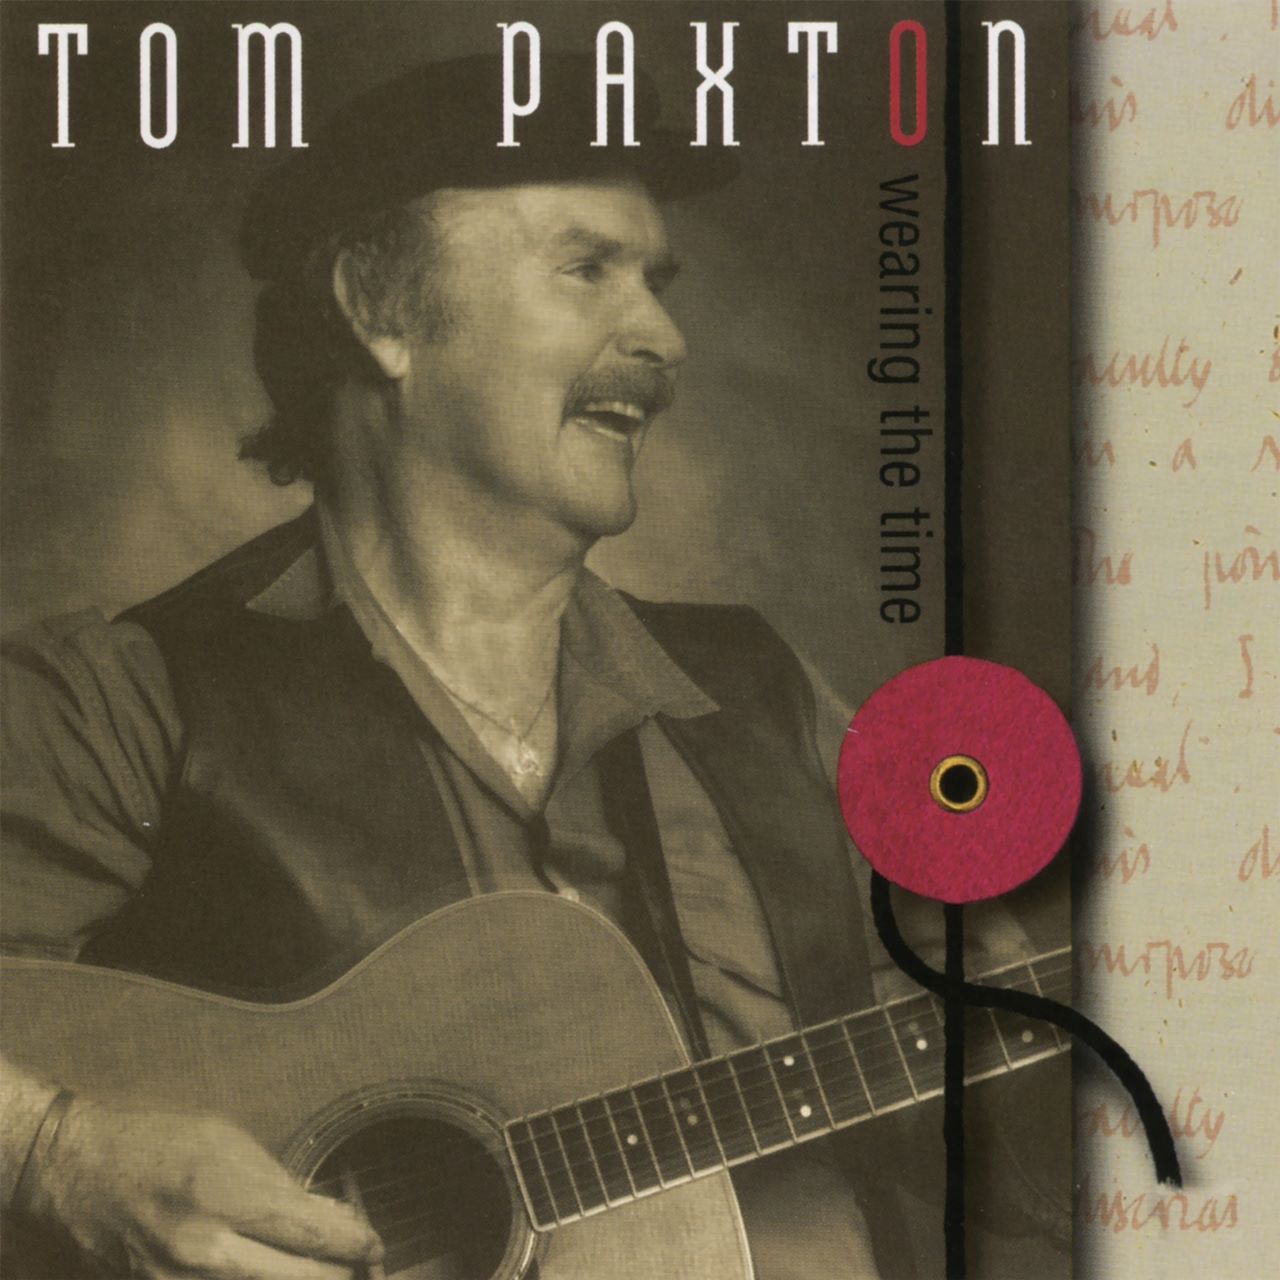 Tom Paxton - Wearing The Time cover album